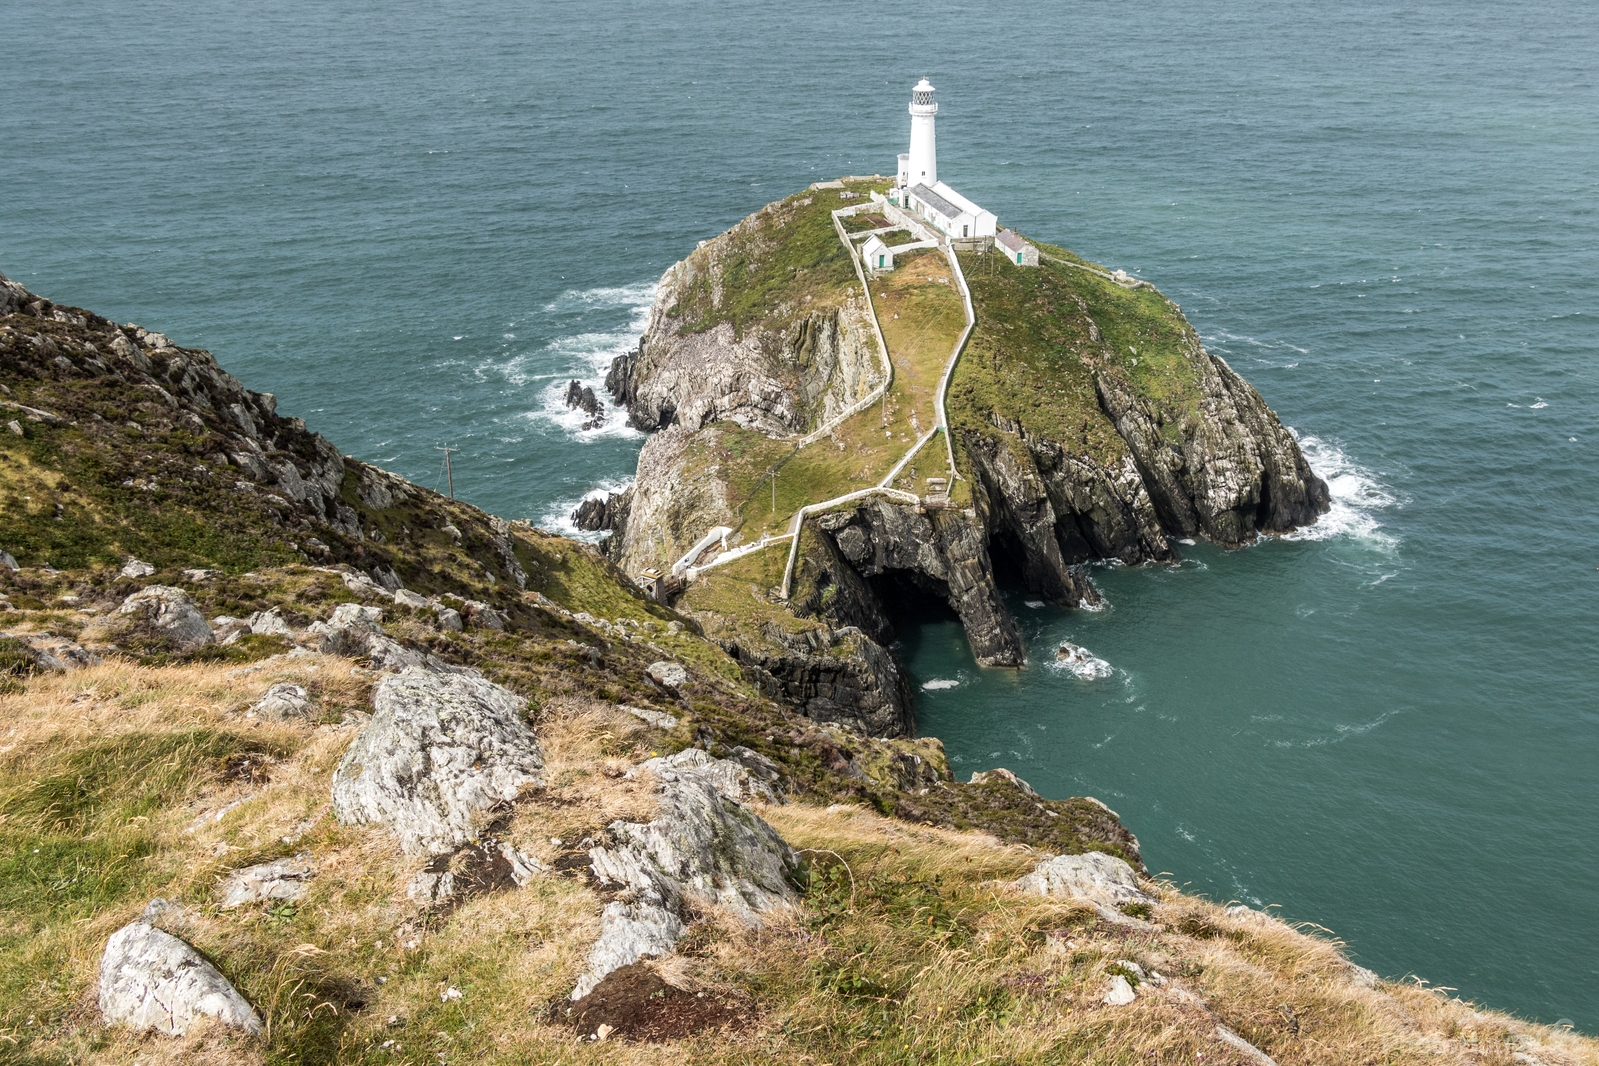 Image of South Stack Lighthouse by Andy Killingbeck